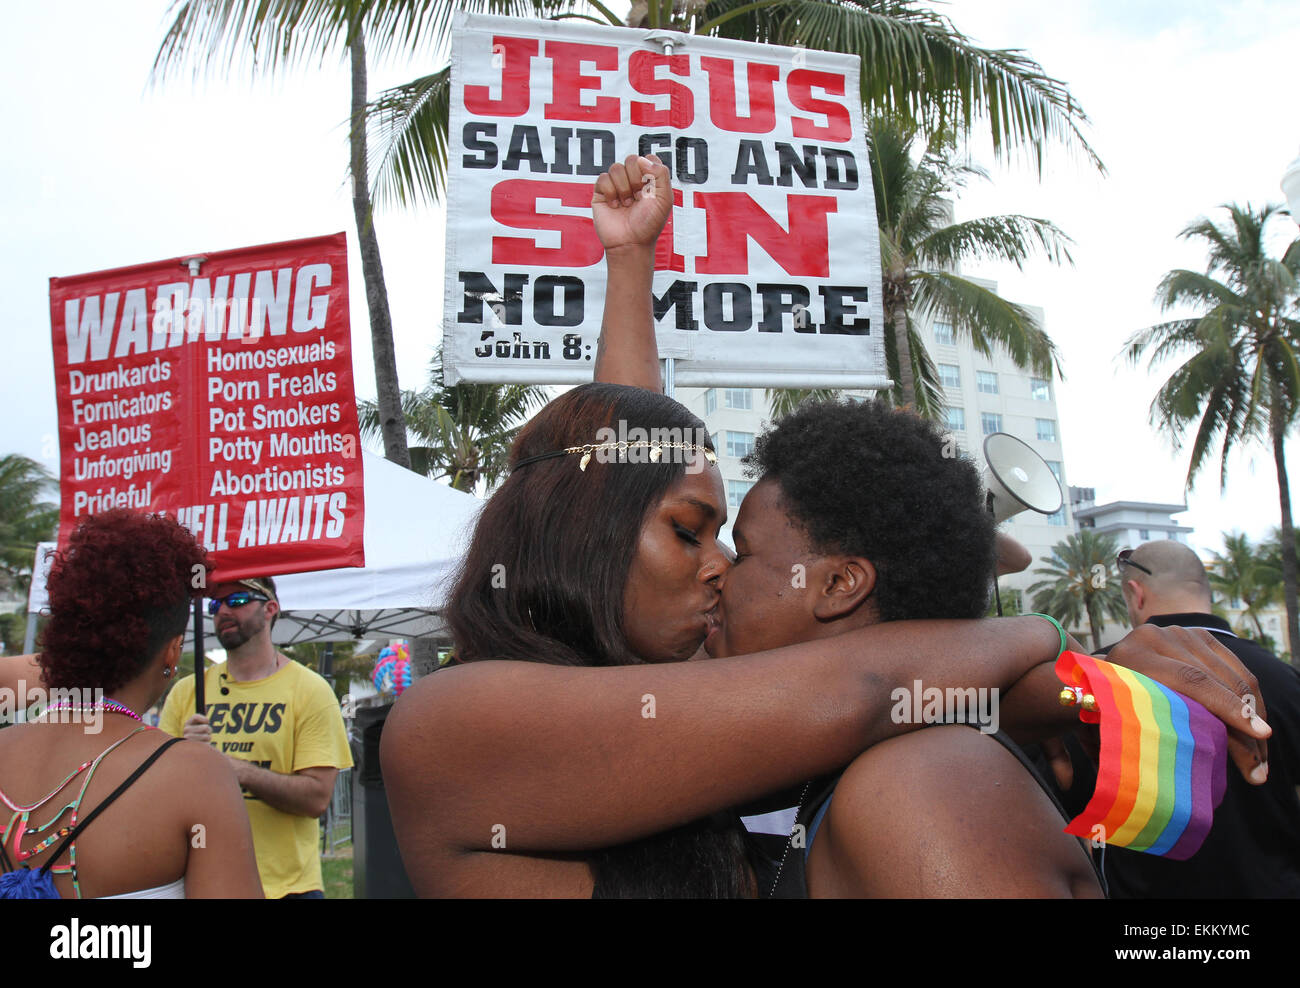 Miami Beach, Florida, USA. 11th April, 2015.  China Jackson (L) and Bookie Gaitor of Miami, kiss in front of members of Team Jesus Preachers who assembled near 12th Street on Ocean Drive with banners to admonish the gay lifestyle during the Miami Beach Gay Pride festival in Miami Beach, Florida on 11 April, 2015.  Credit:  Sean Drakes/Alamy Live News Stock Photo